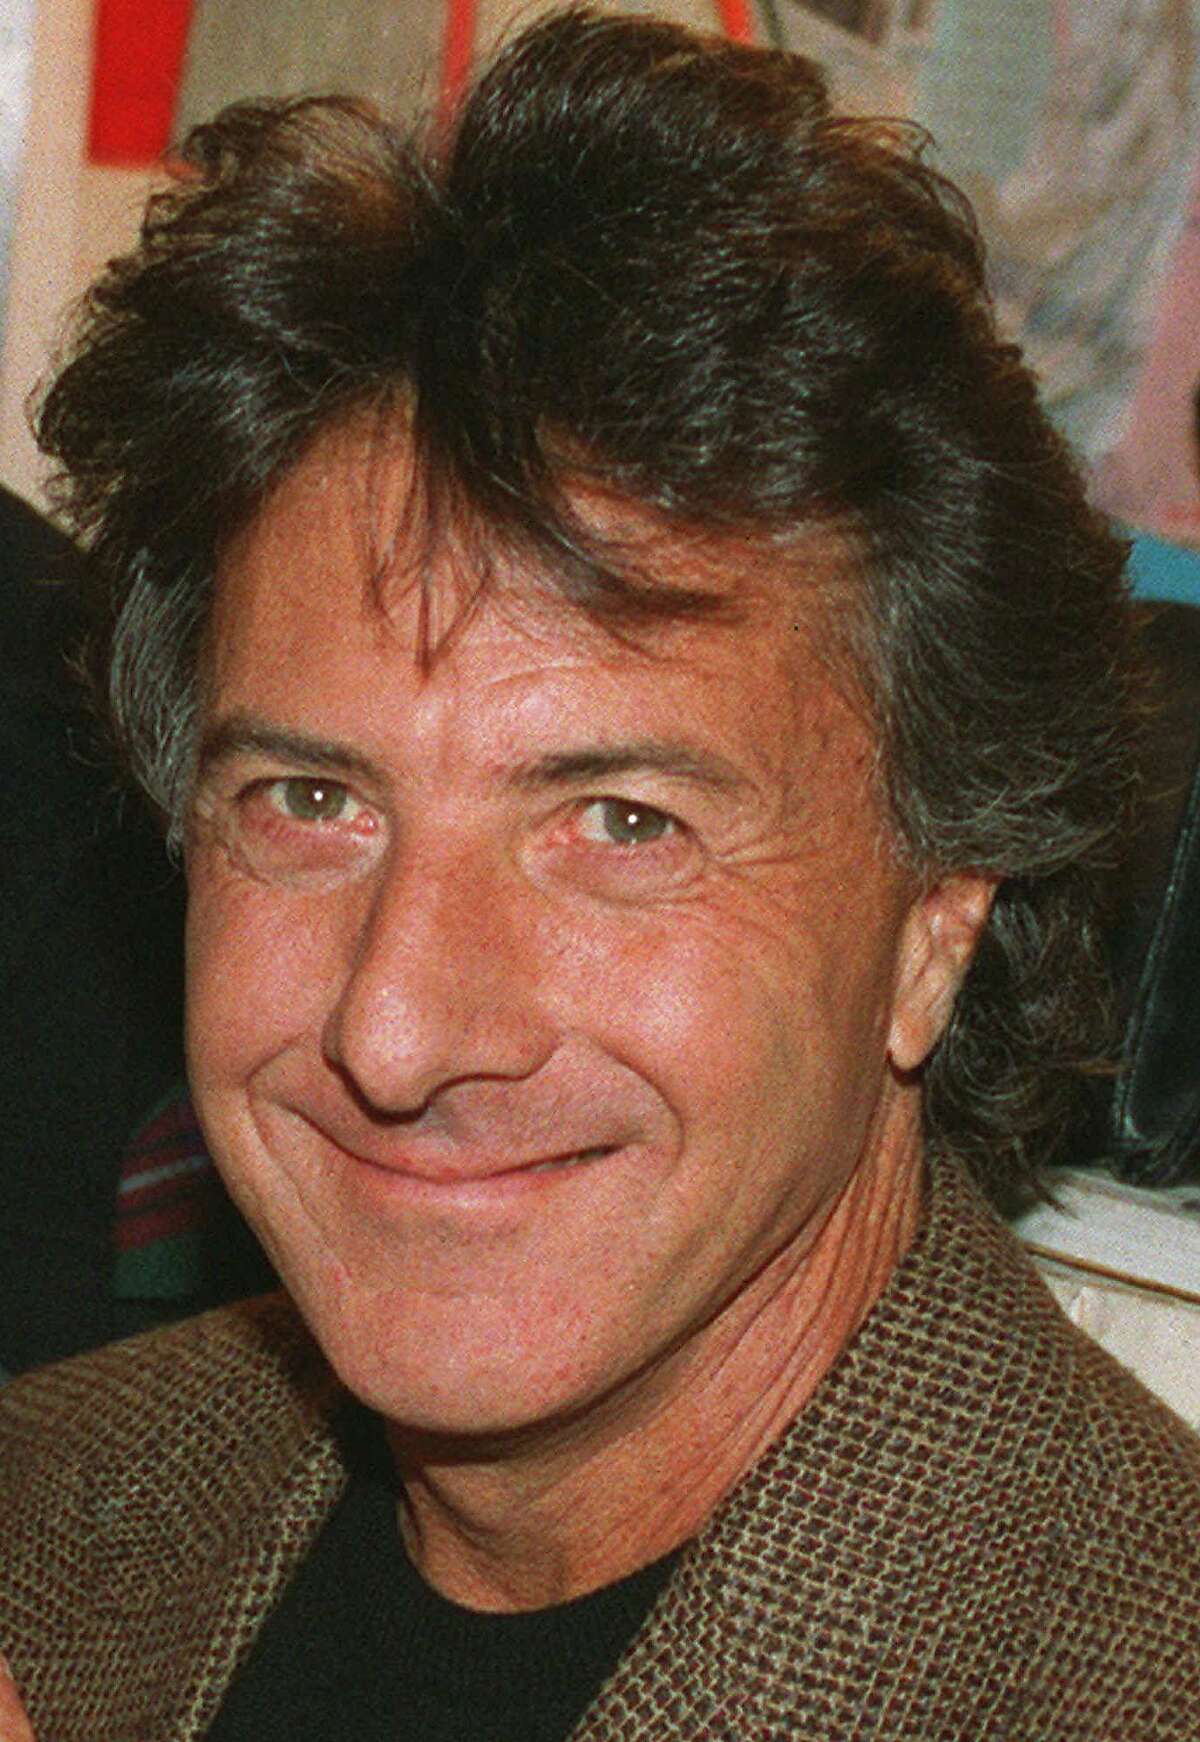 FILE--Actor Dustin Hoffman, shown in a September 1993 file photo, can go ahead with a lawsuit against Los Angeles Magazine. A federal judge said the magazine's computer-altered photograph of Hoffman in a yellow dress isn t protected by the Constitution. Hoffman sued for $5 million in April 1997 claiming the photograph was altered with a computer and used without his permission. (AP Photo/Osamu Honda)